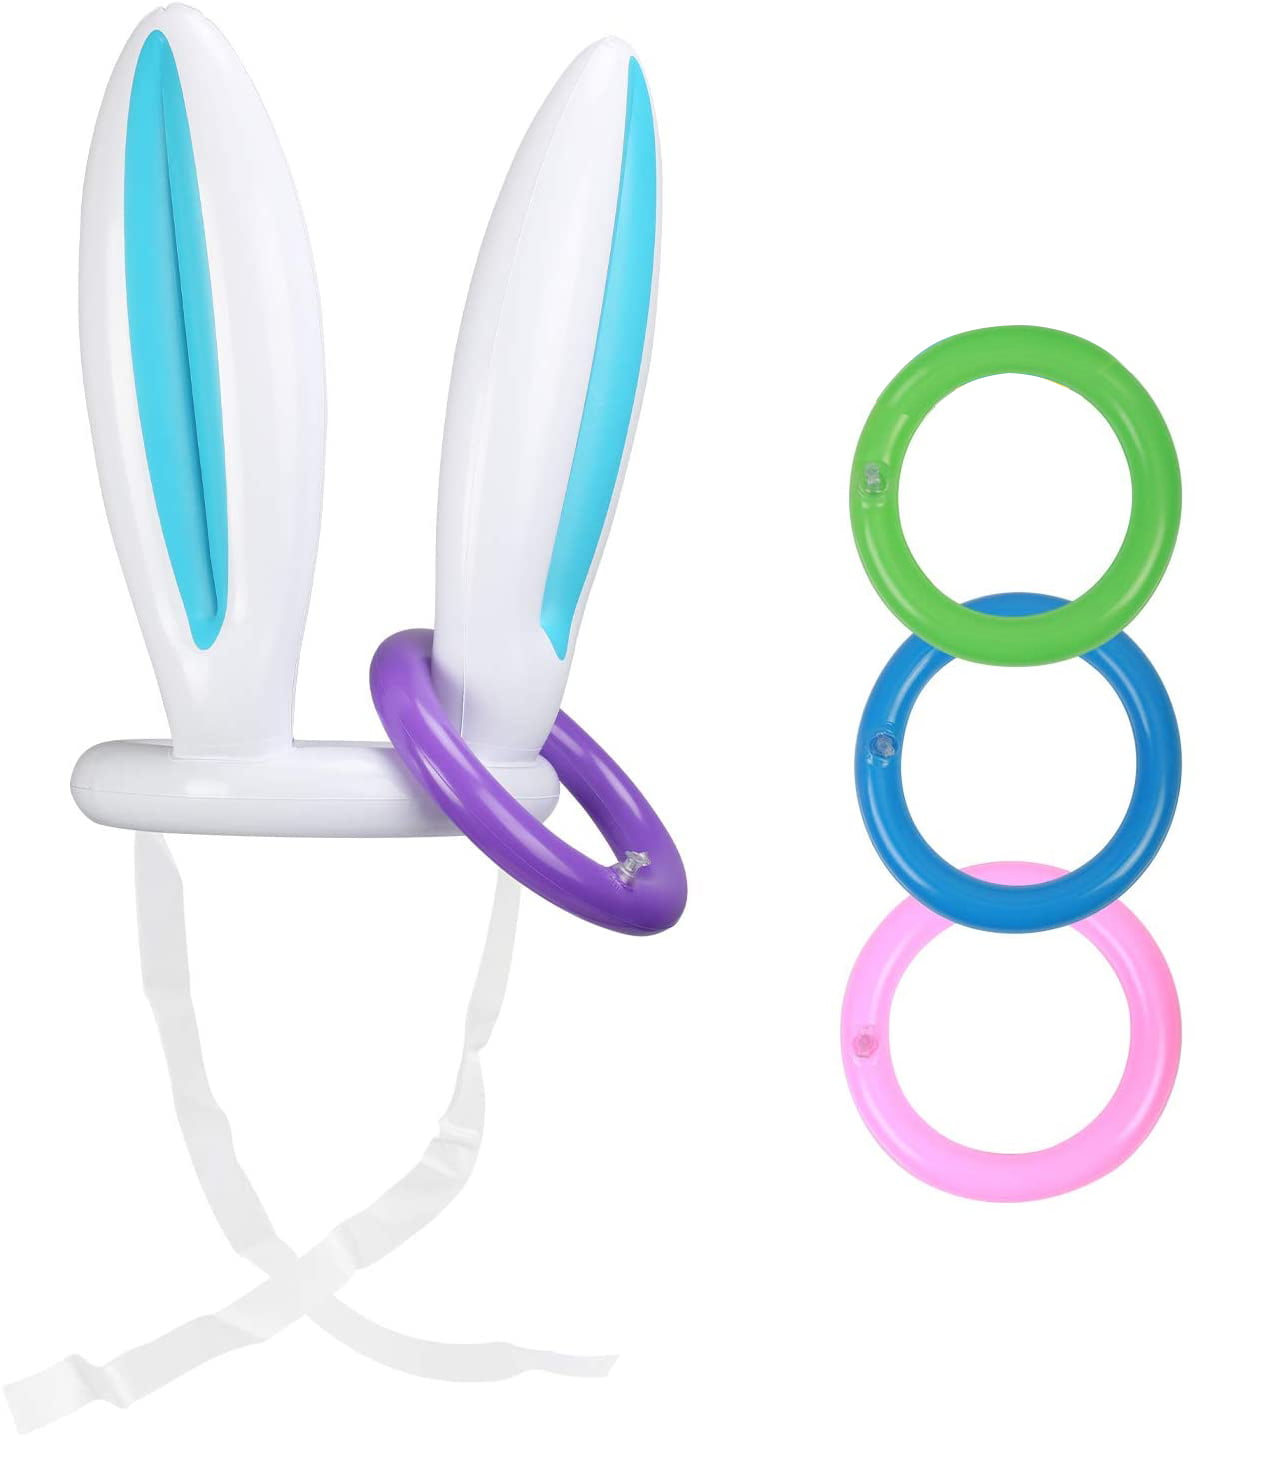 2pcs Inflatable Bunny Ears with Easter Banner and 10pcs Rings 4pcs Sandbag for Kids Family Decorations Easter Party Supplies Satkago Easter Toss Game